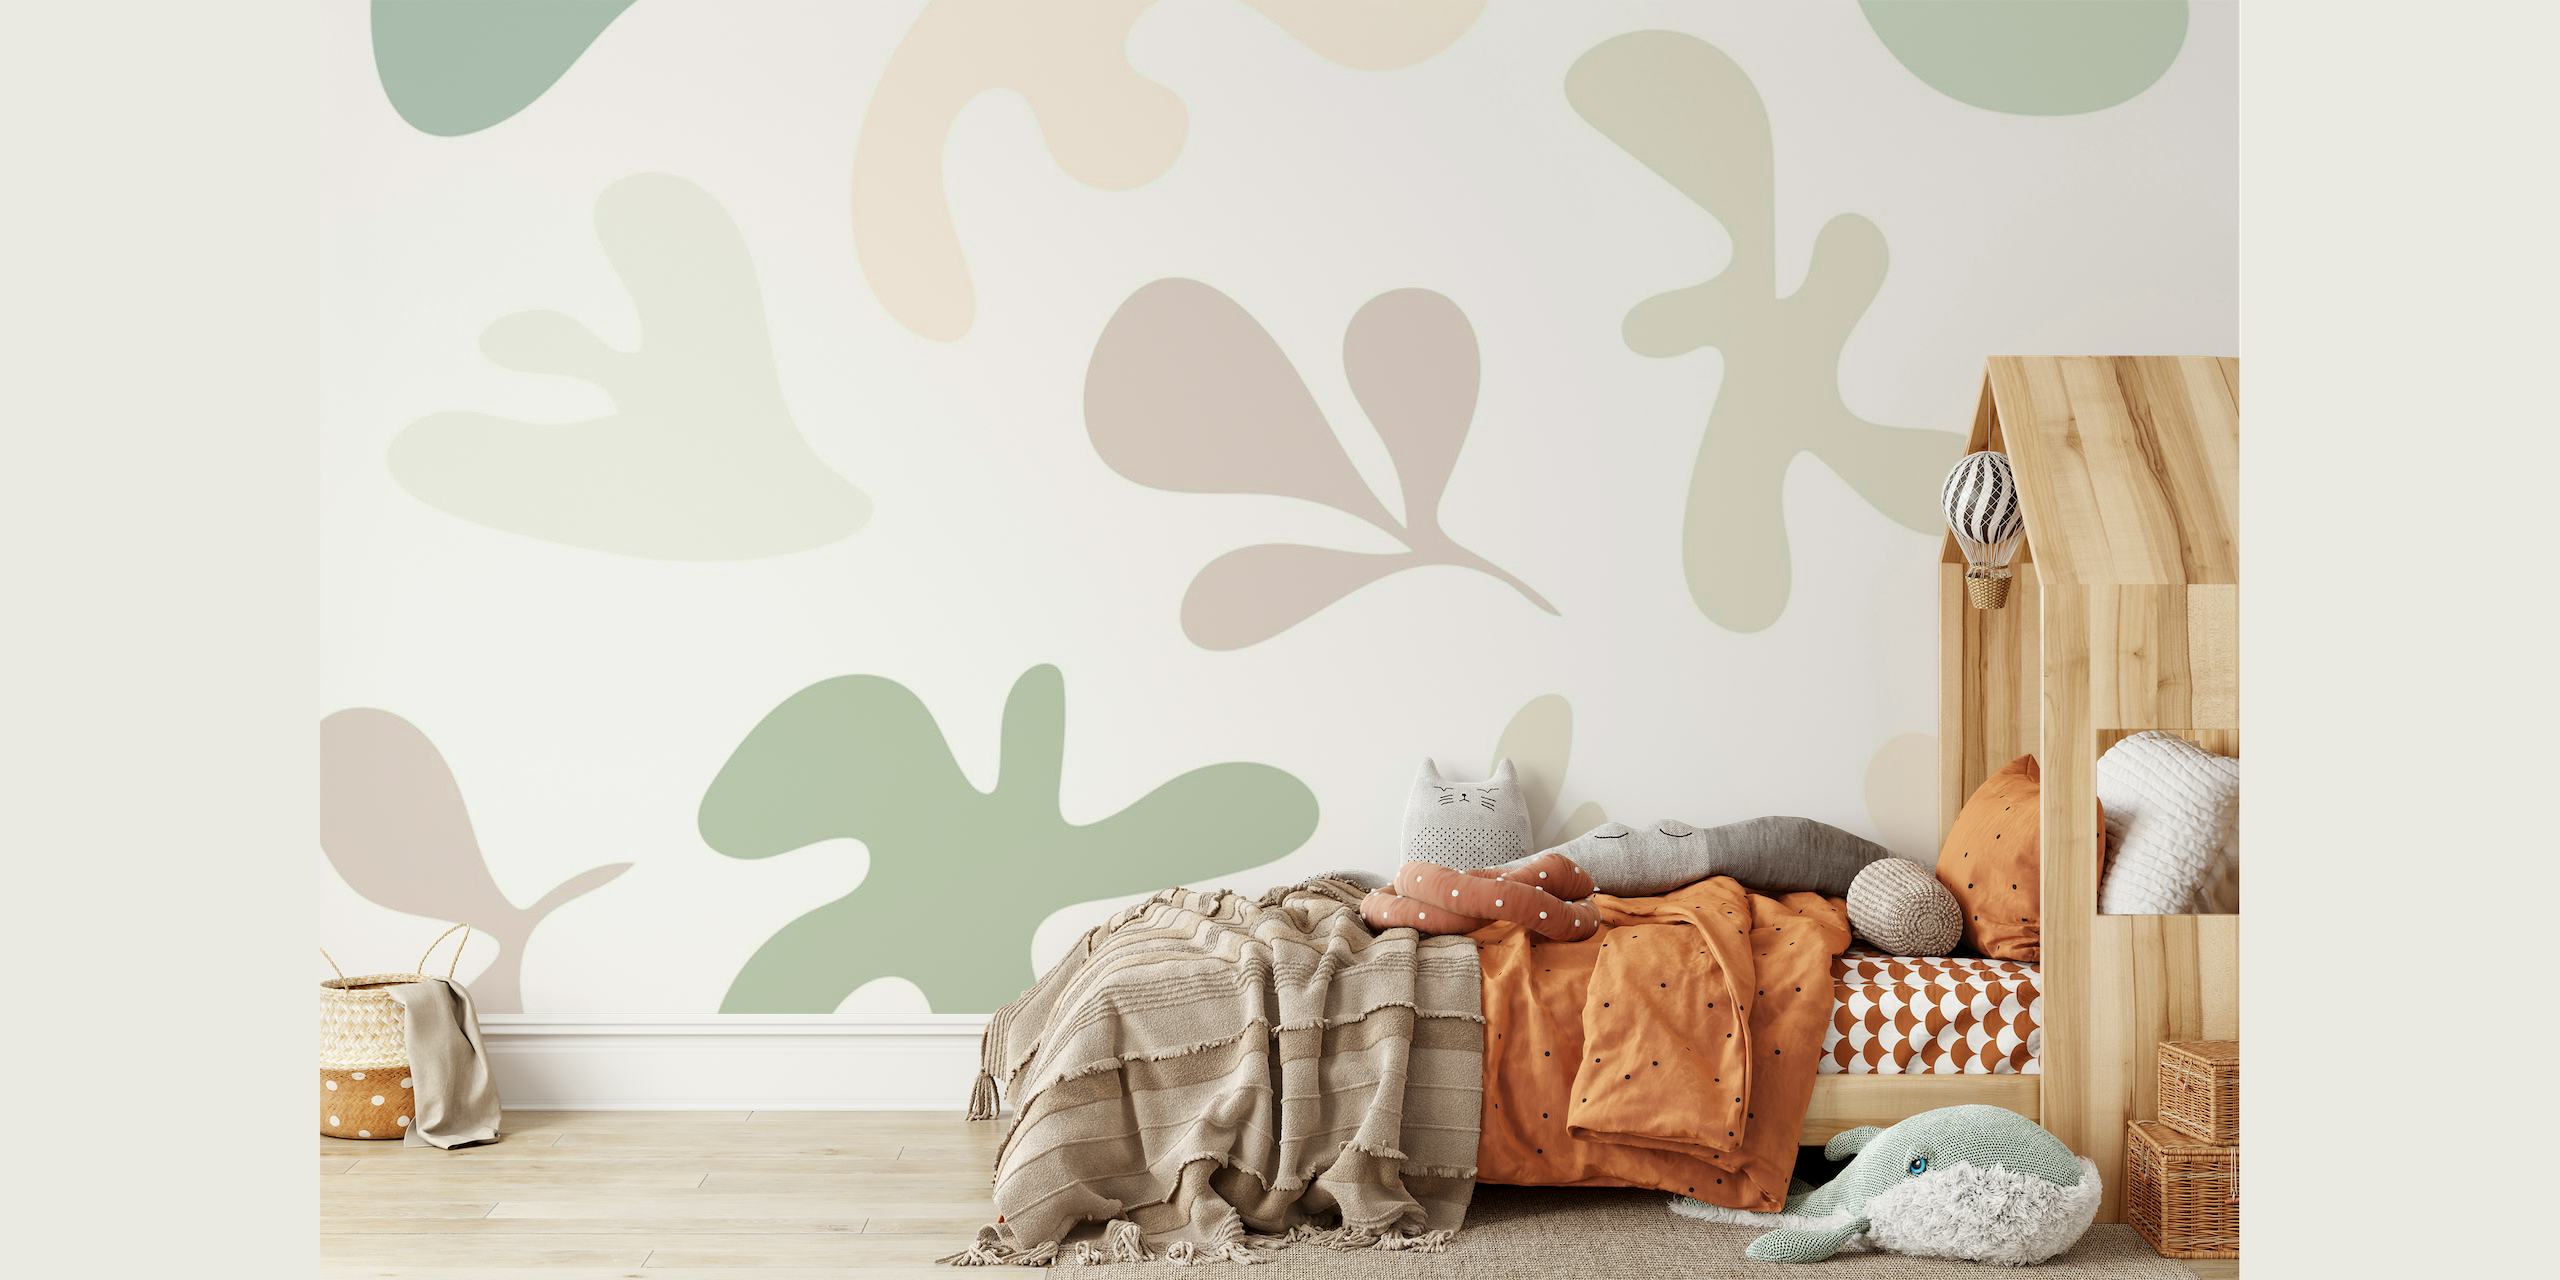 Soft green abstract shapes and foliage patterns on a wall mural